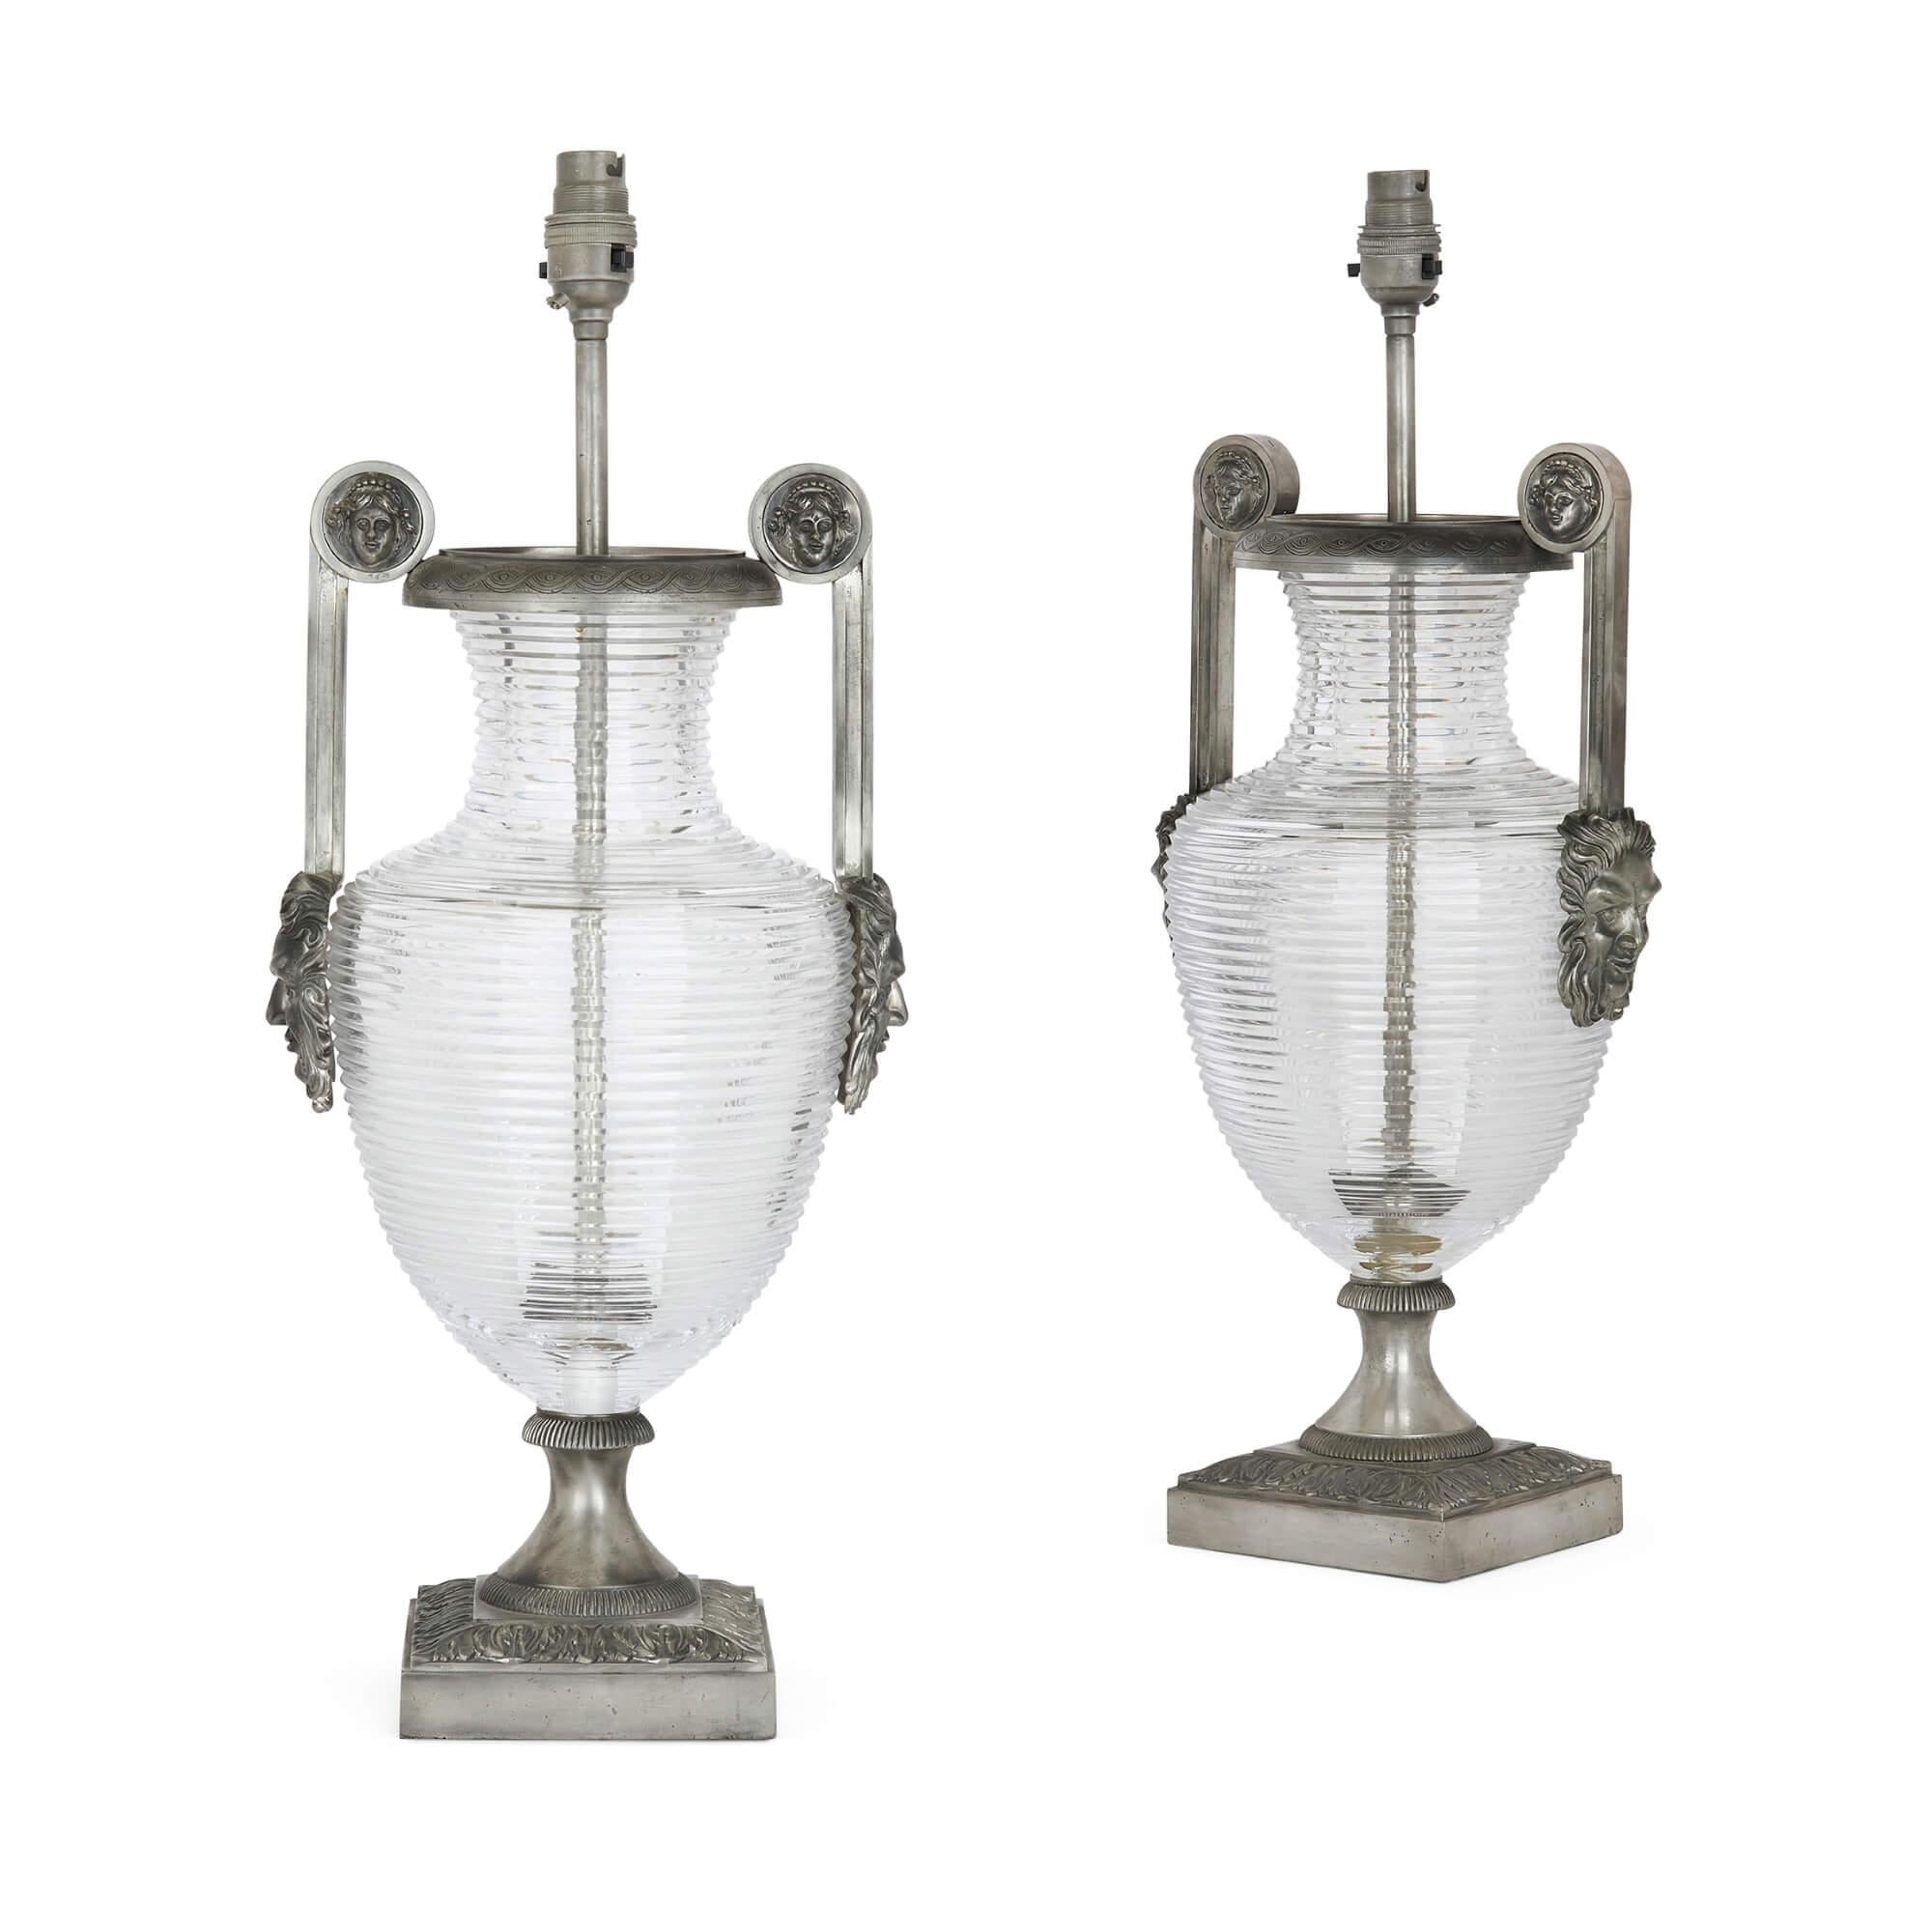 A pair of silvered-bronze and cut-glass urn lamp bases in the French Empire style
American, 20th century
Measures: Height 55cm, width 22cm, depth 18cm

These fine lamp-bases, shaped like Classical amphorae, and combining a modern feel with a